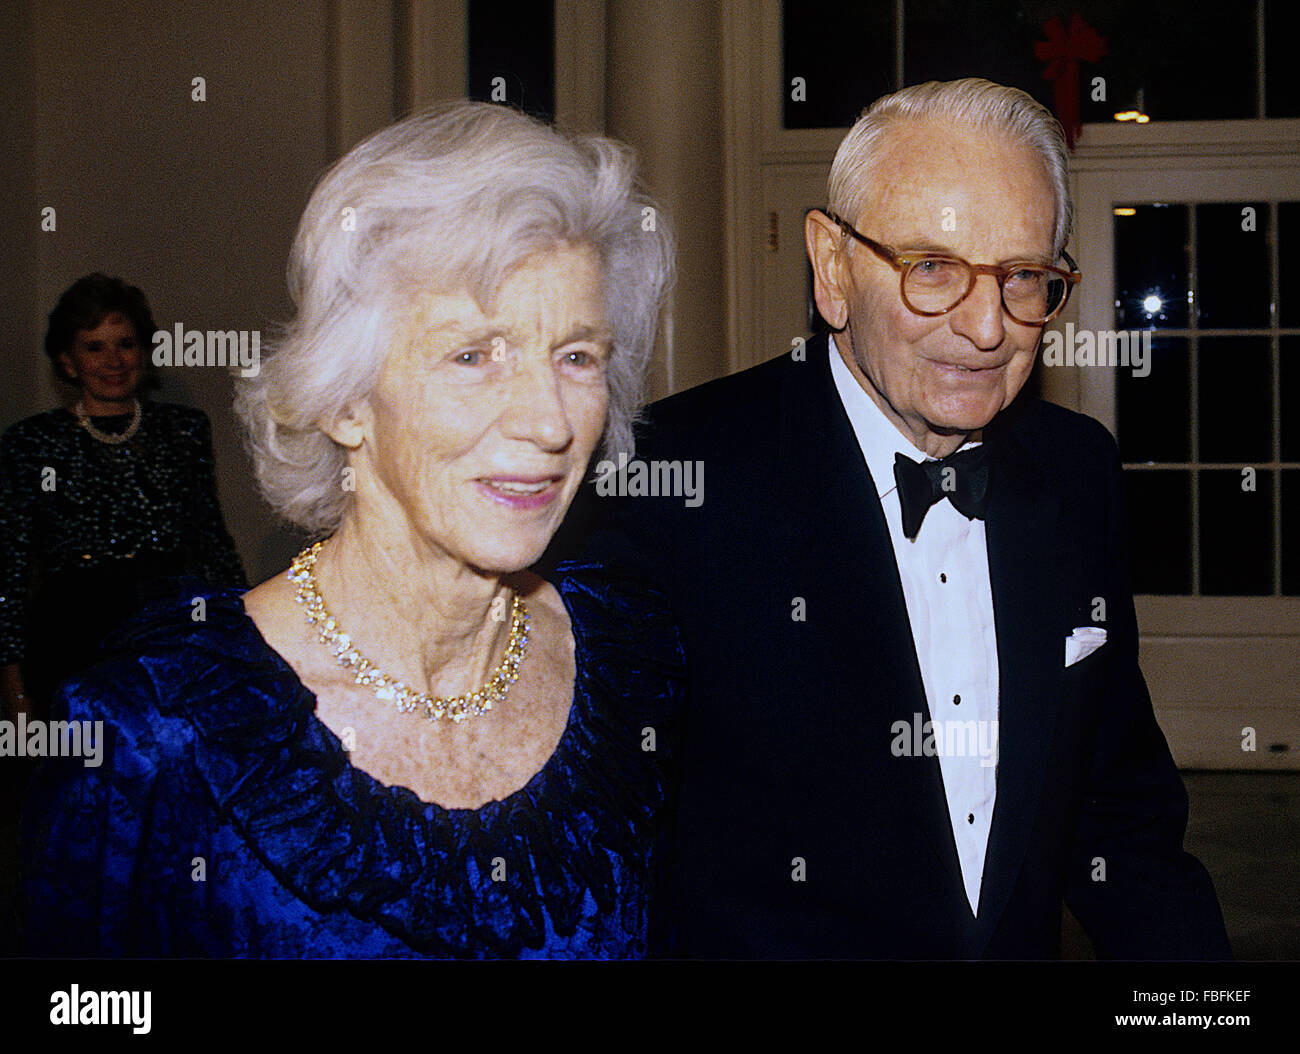 Washington, DC. 12-6-1992  Laurance Rockefeller and wife Mary arrive at the White House to attend the State Dinner for the Kennedy Centers Honors.  Laurance Spelman Rockefeller an American philanthropist, businessman, financier, and major conservationist. He was a prominent third-generation member of the Rockefeller family, being the fourth child of John Davison Rockefeller, Jr. and Abigail Greene 'Abby' Aldrich. His siblings were Abby, John III, Nelson, Winthrop, and David.  Credit: Mark Reinstein Stock Photo